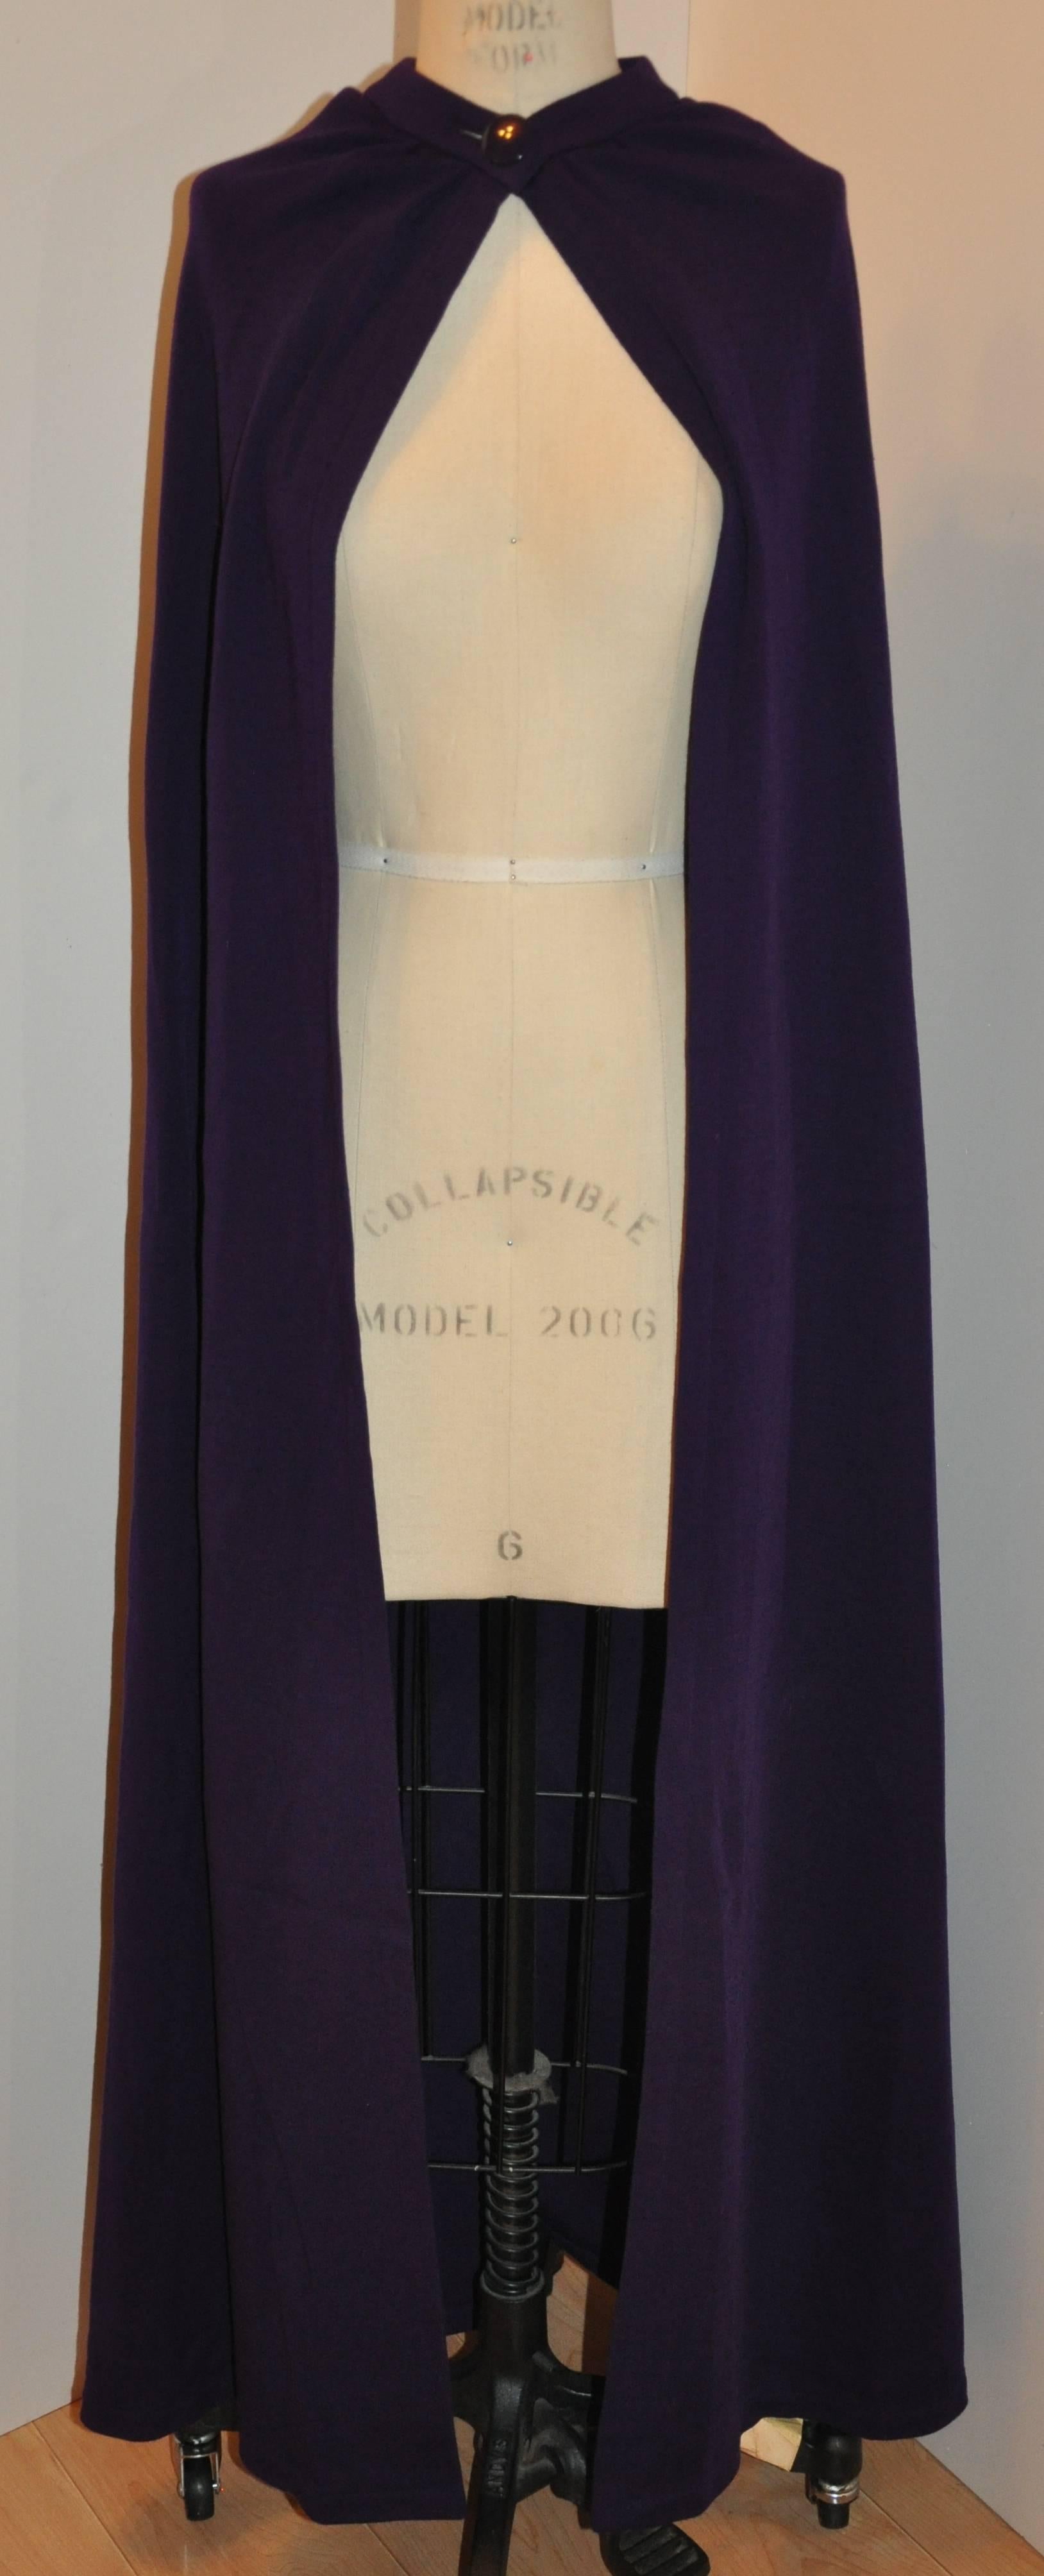        This rare Yves Saint Laurent Rive Gauche "Opium Collection's" magnificent and simply elegant deep violet wool jersey evening cape is detailed with a mandarin collar and accented with a simple button on the front center. This